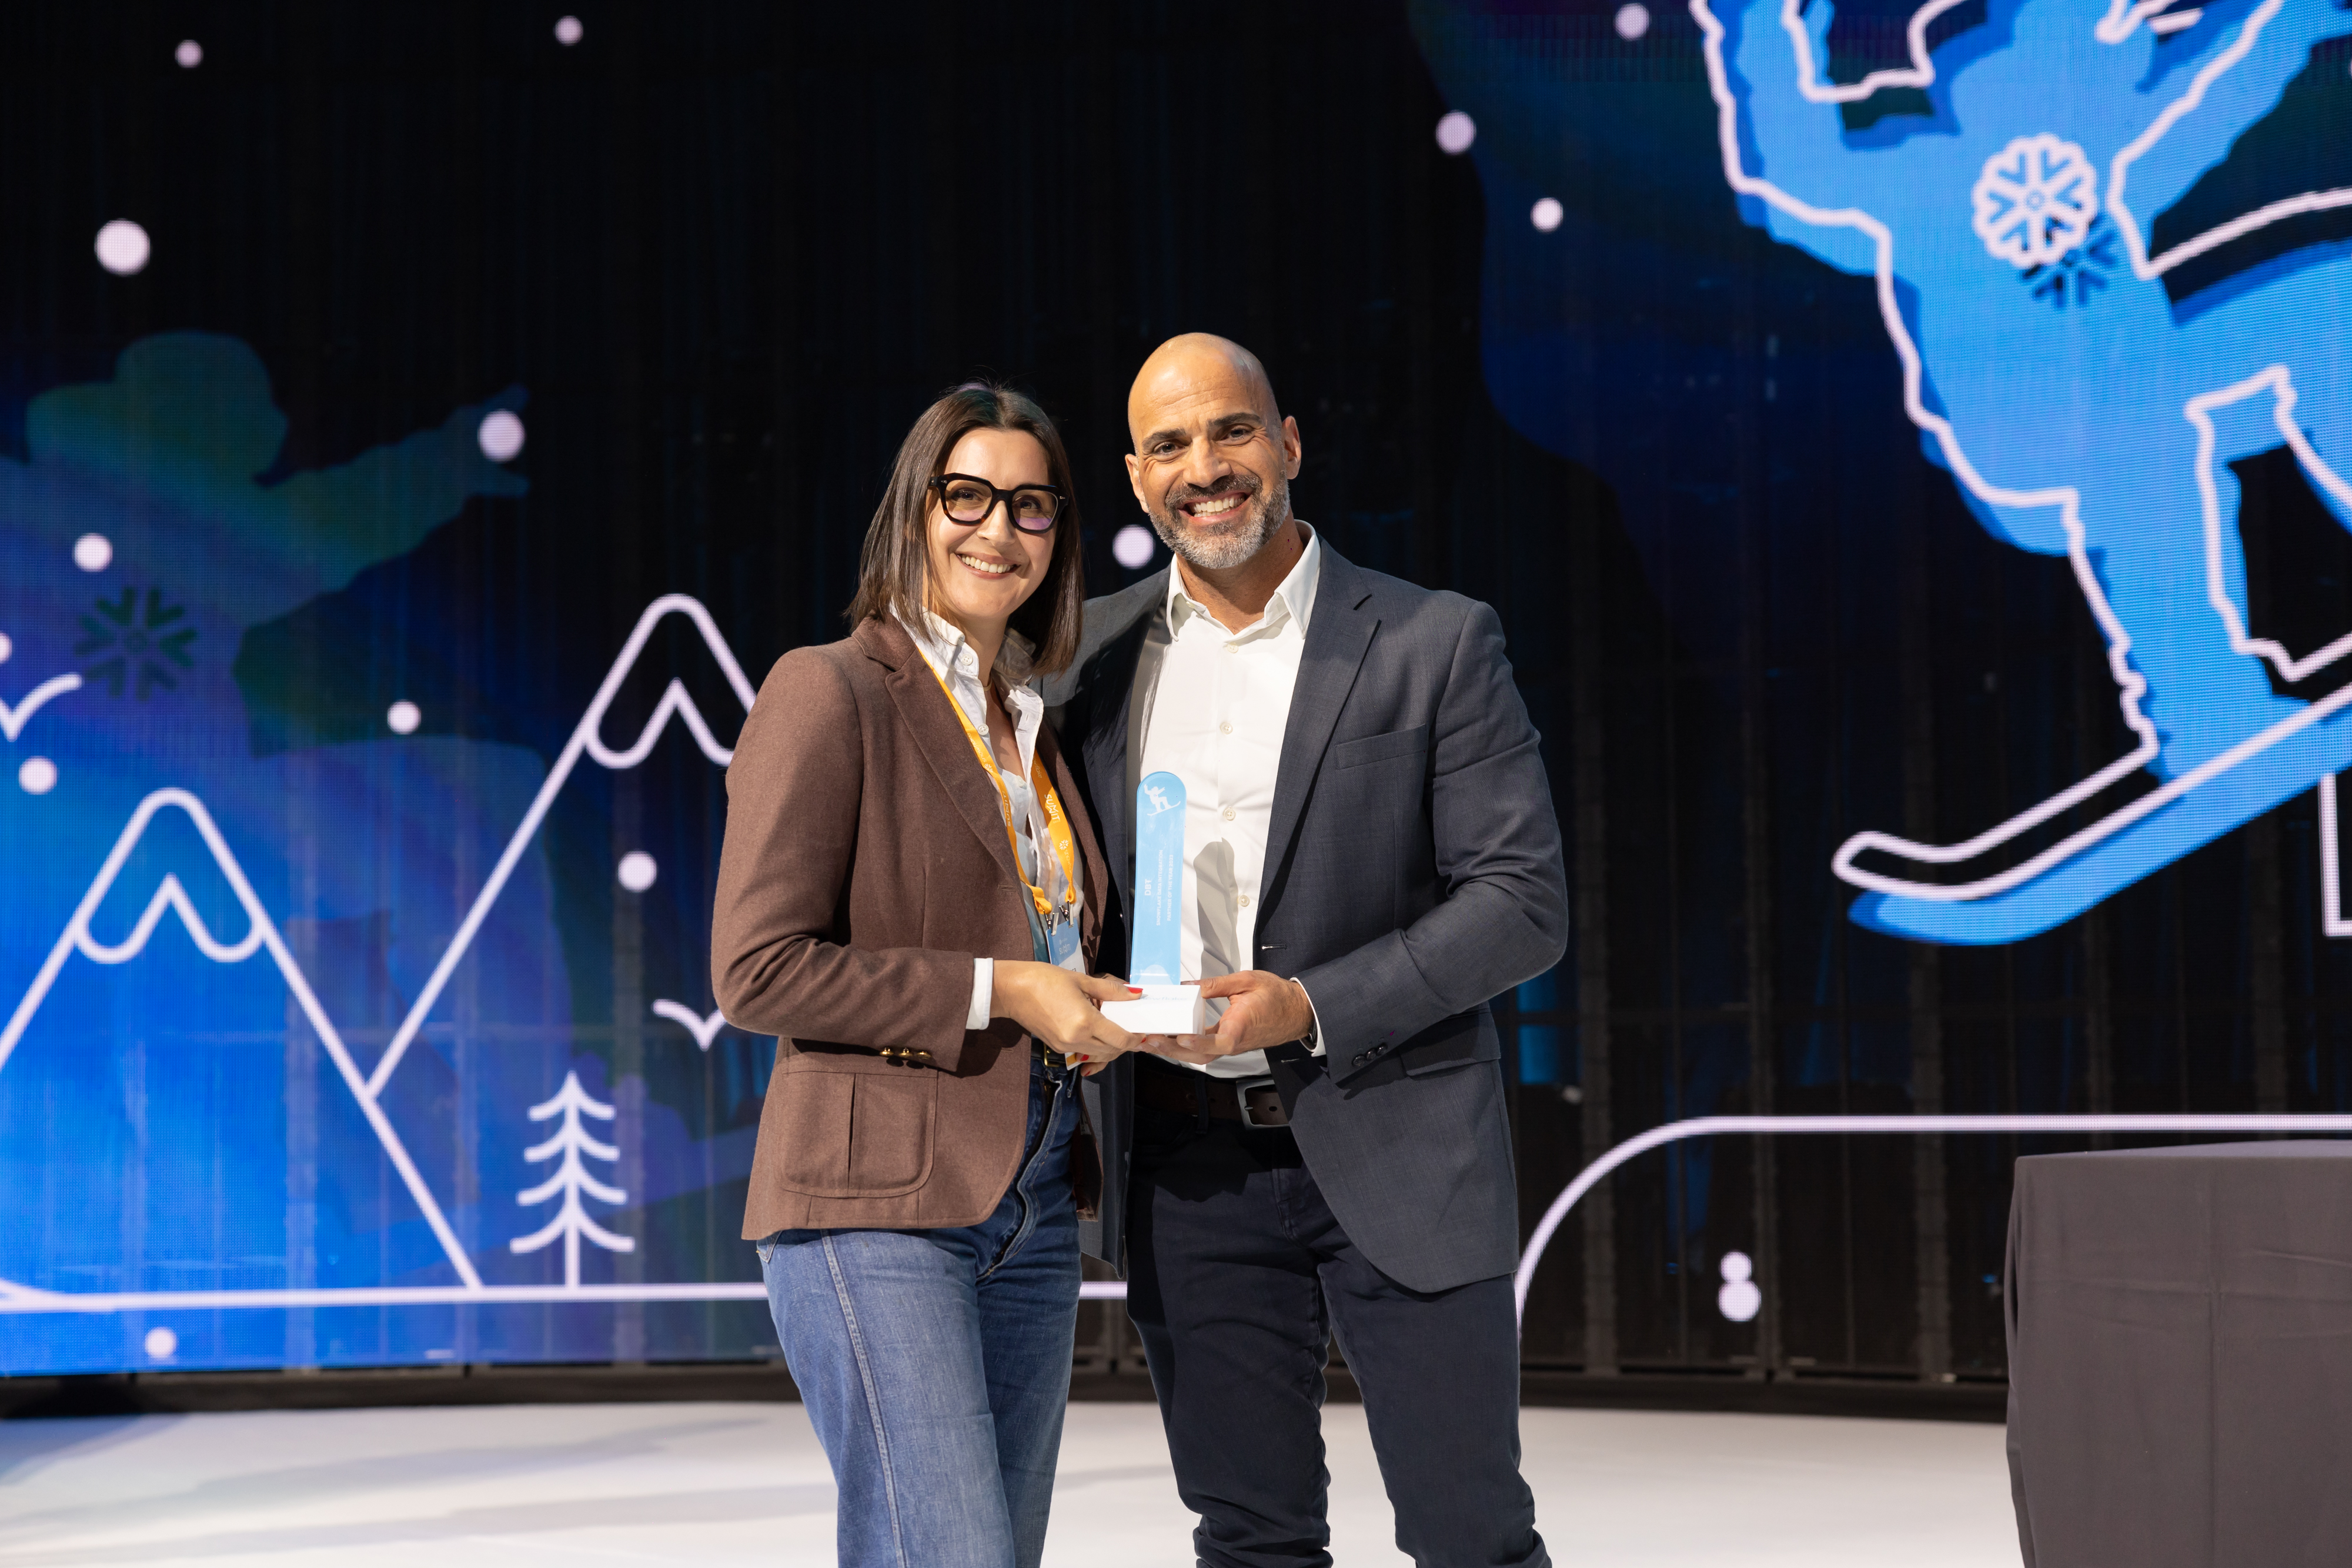 dbt Labs recognized as Data Integration Partner of the Year by Snowflake